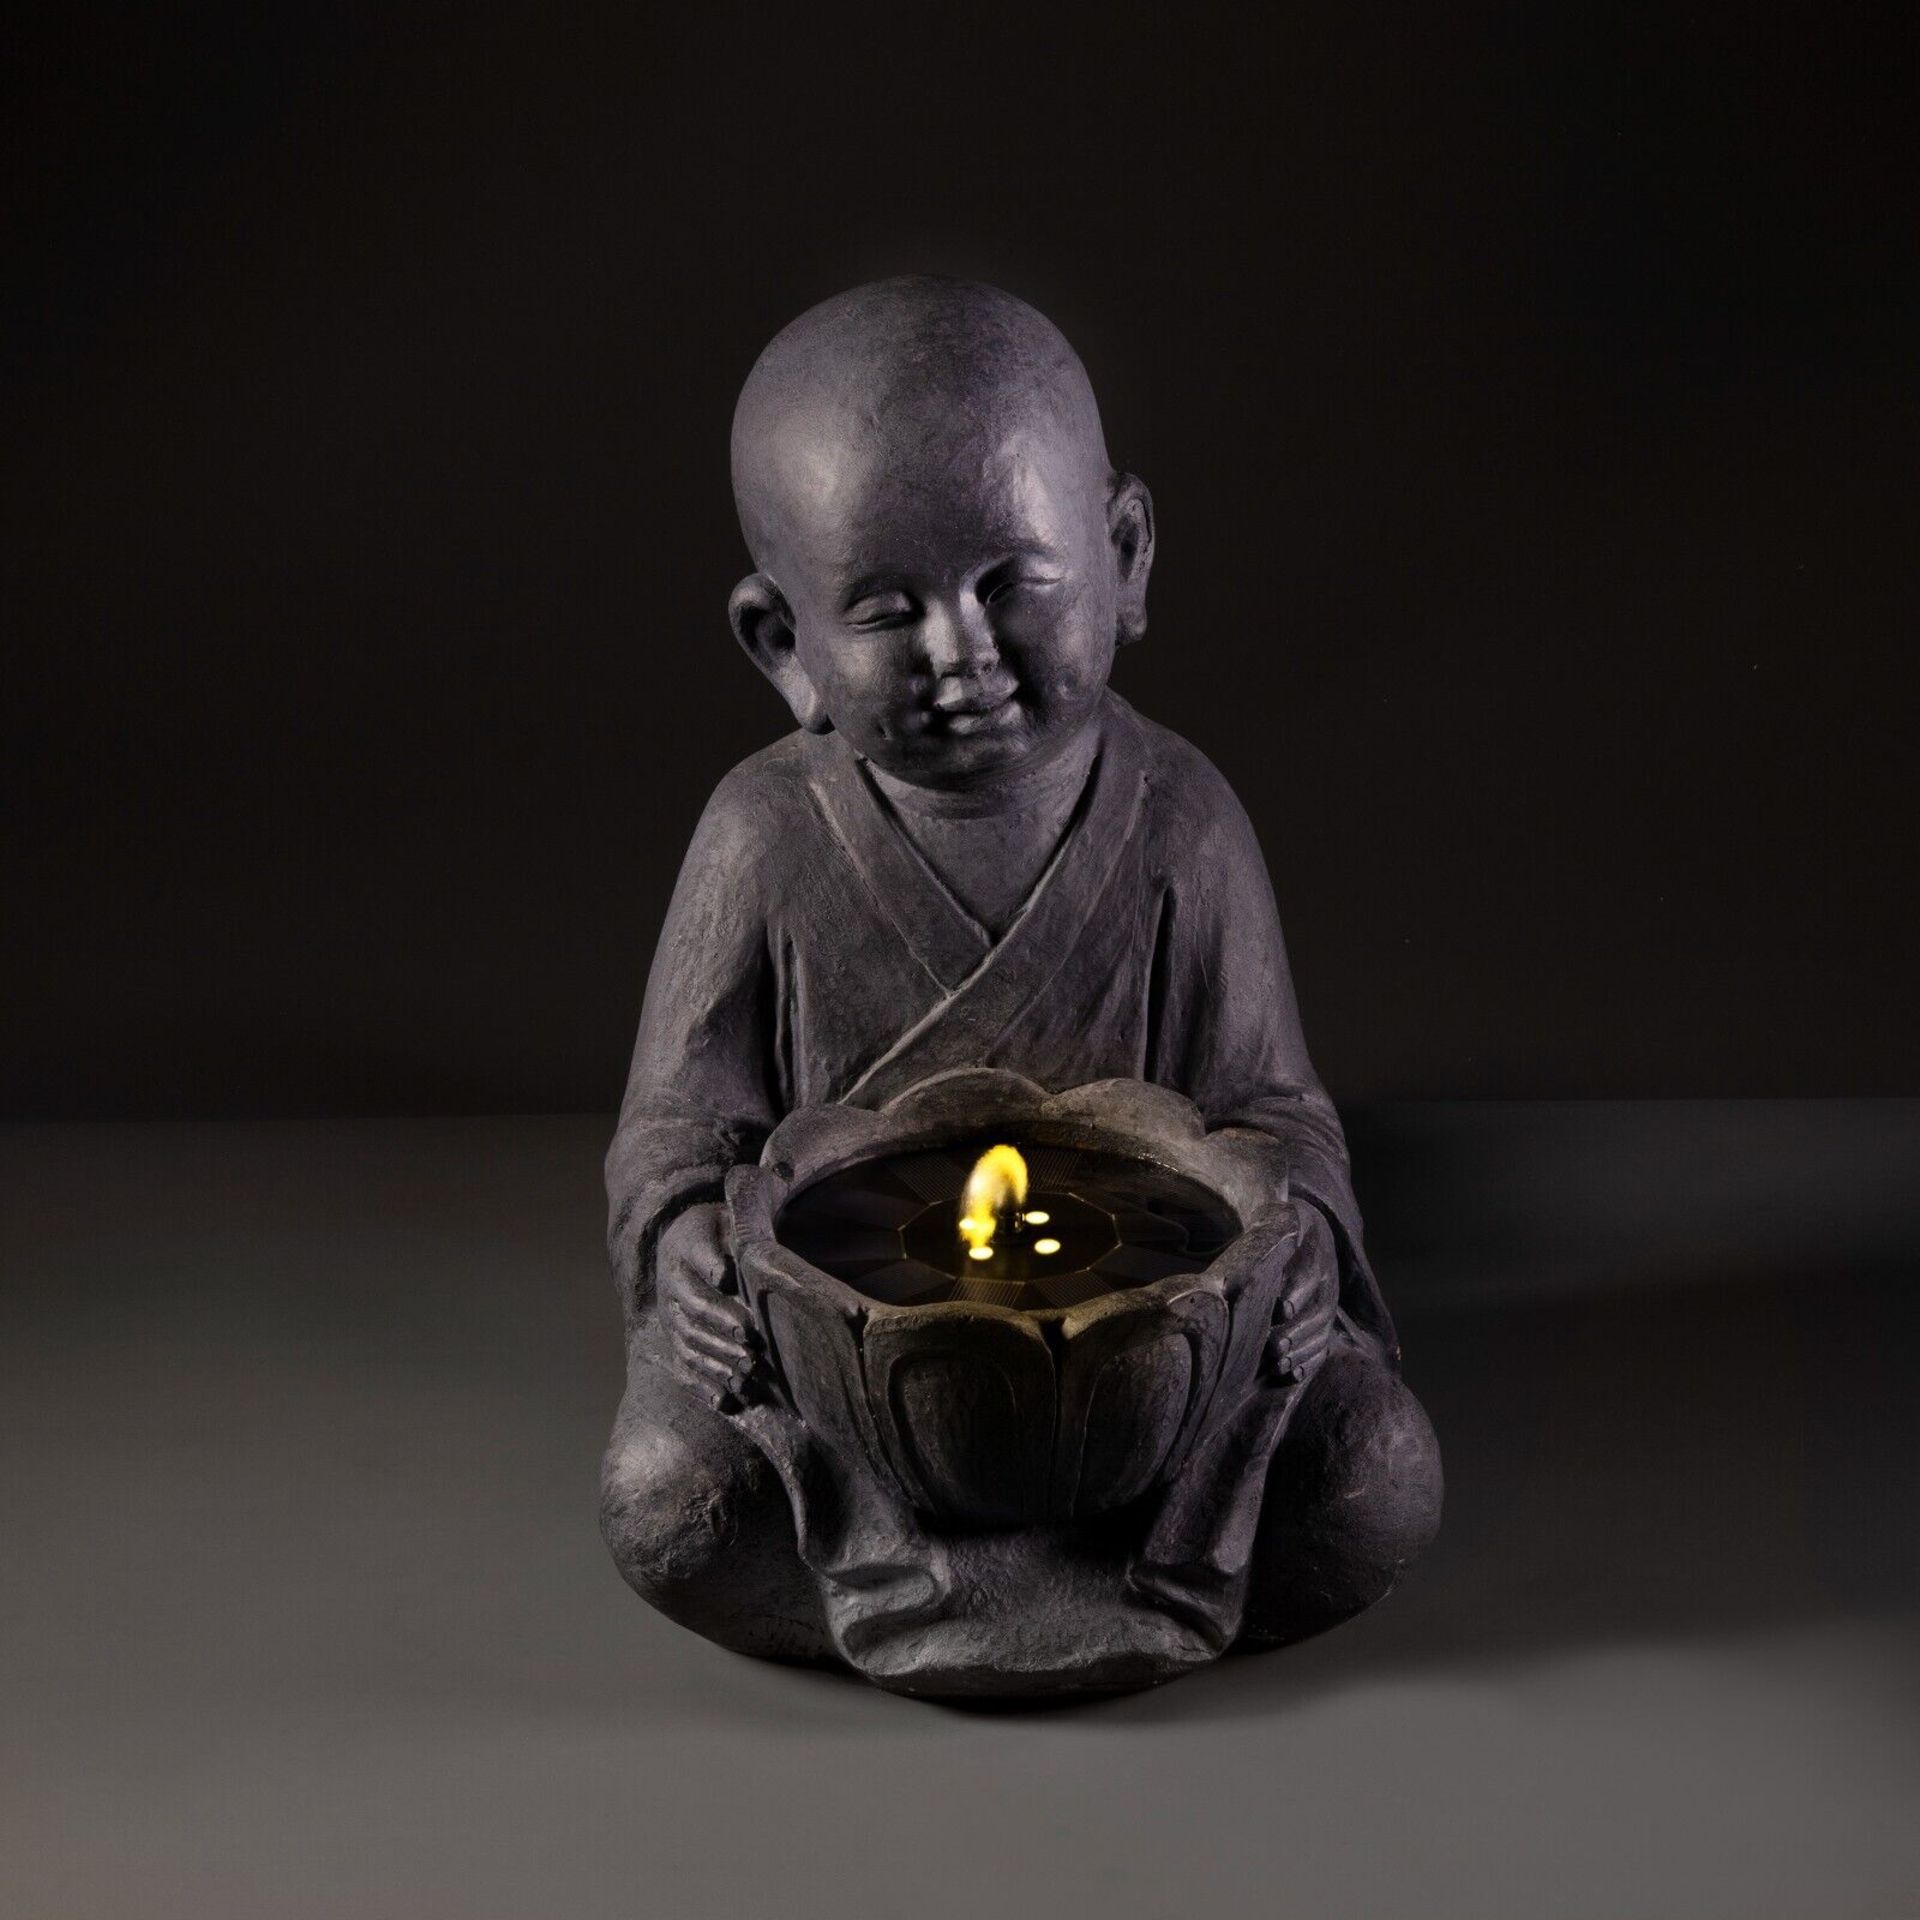 BRAND NEW BABY BUDDHA WATER FEATURE SOLAR ON DEMAND WITH WARM WHITE LED LIGHTS - Image 3 of 4